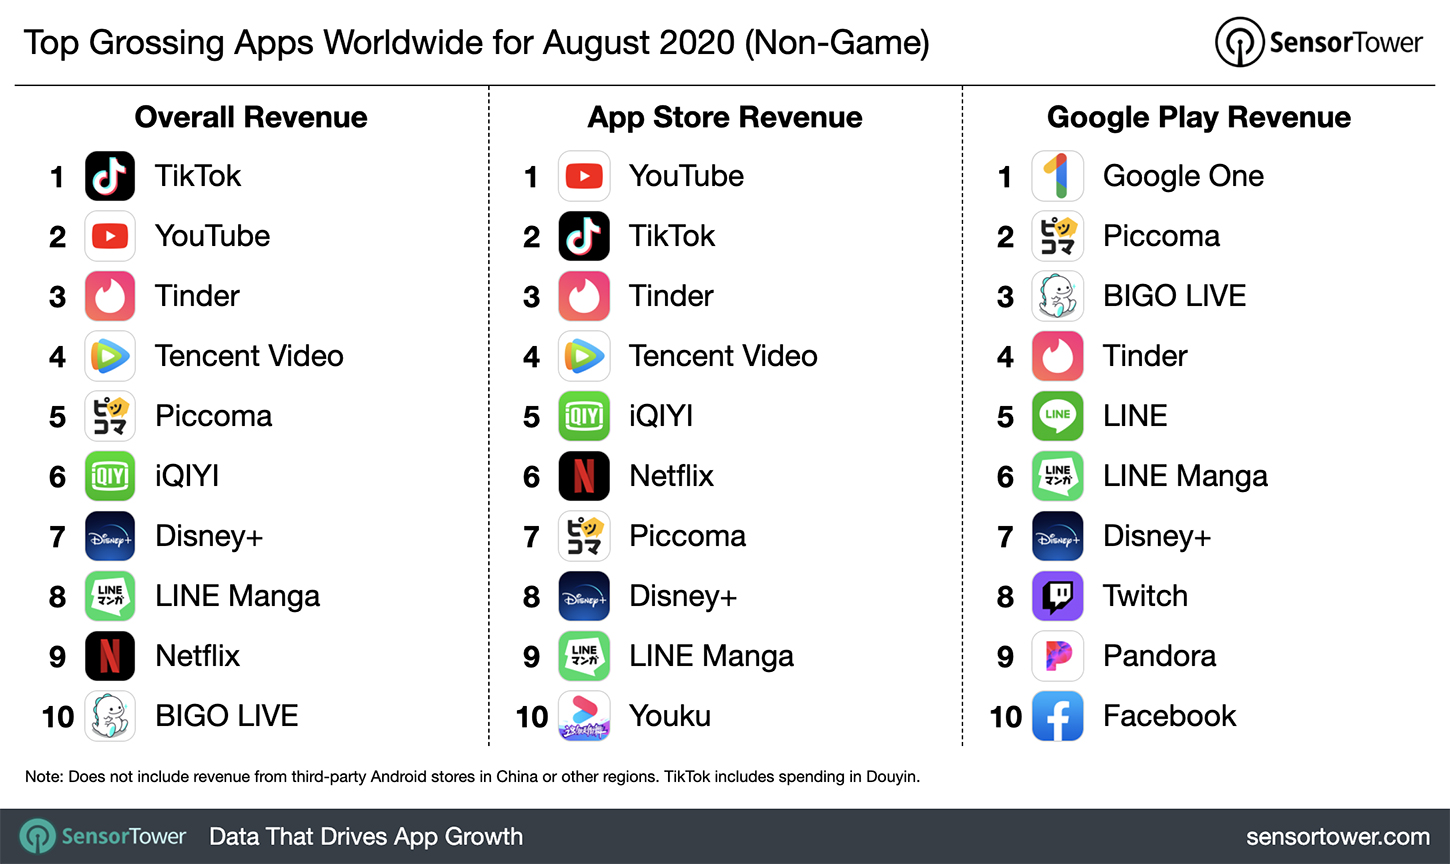 Top Grossing Apps Worldwide for August 2020